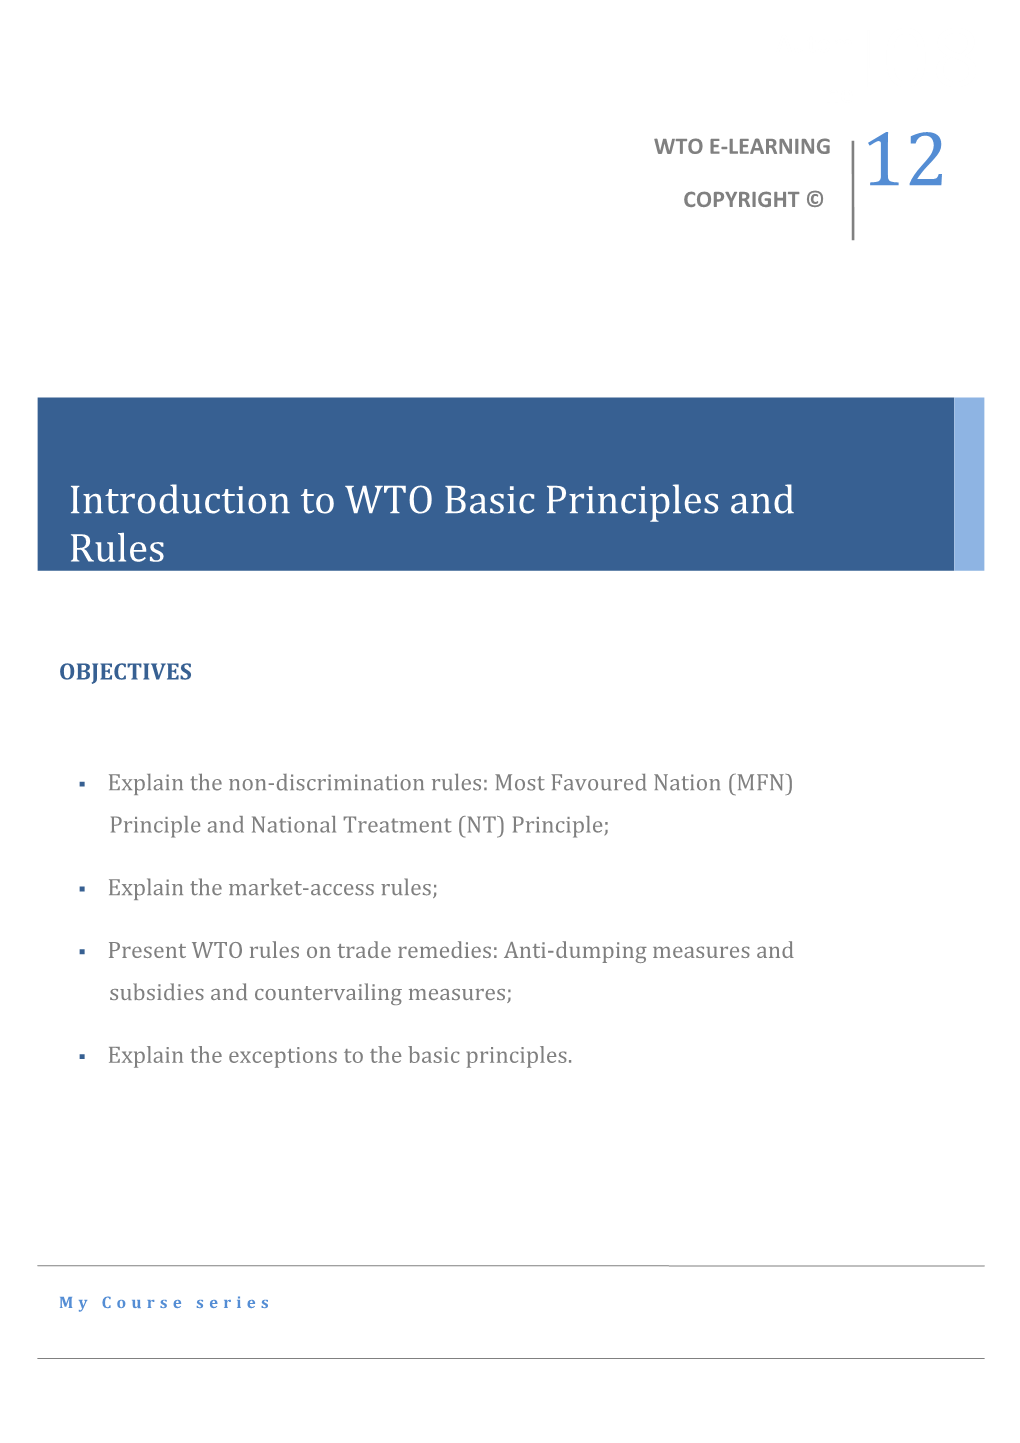 Part I: Basic Principles in the Wto